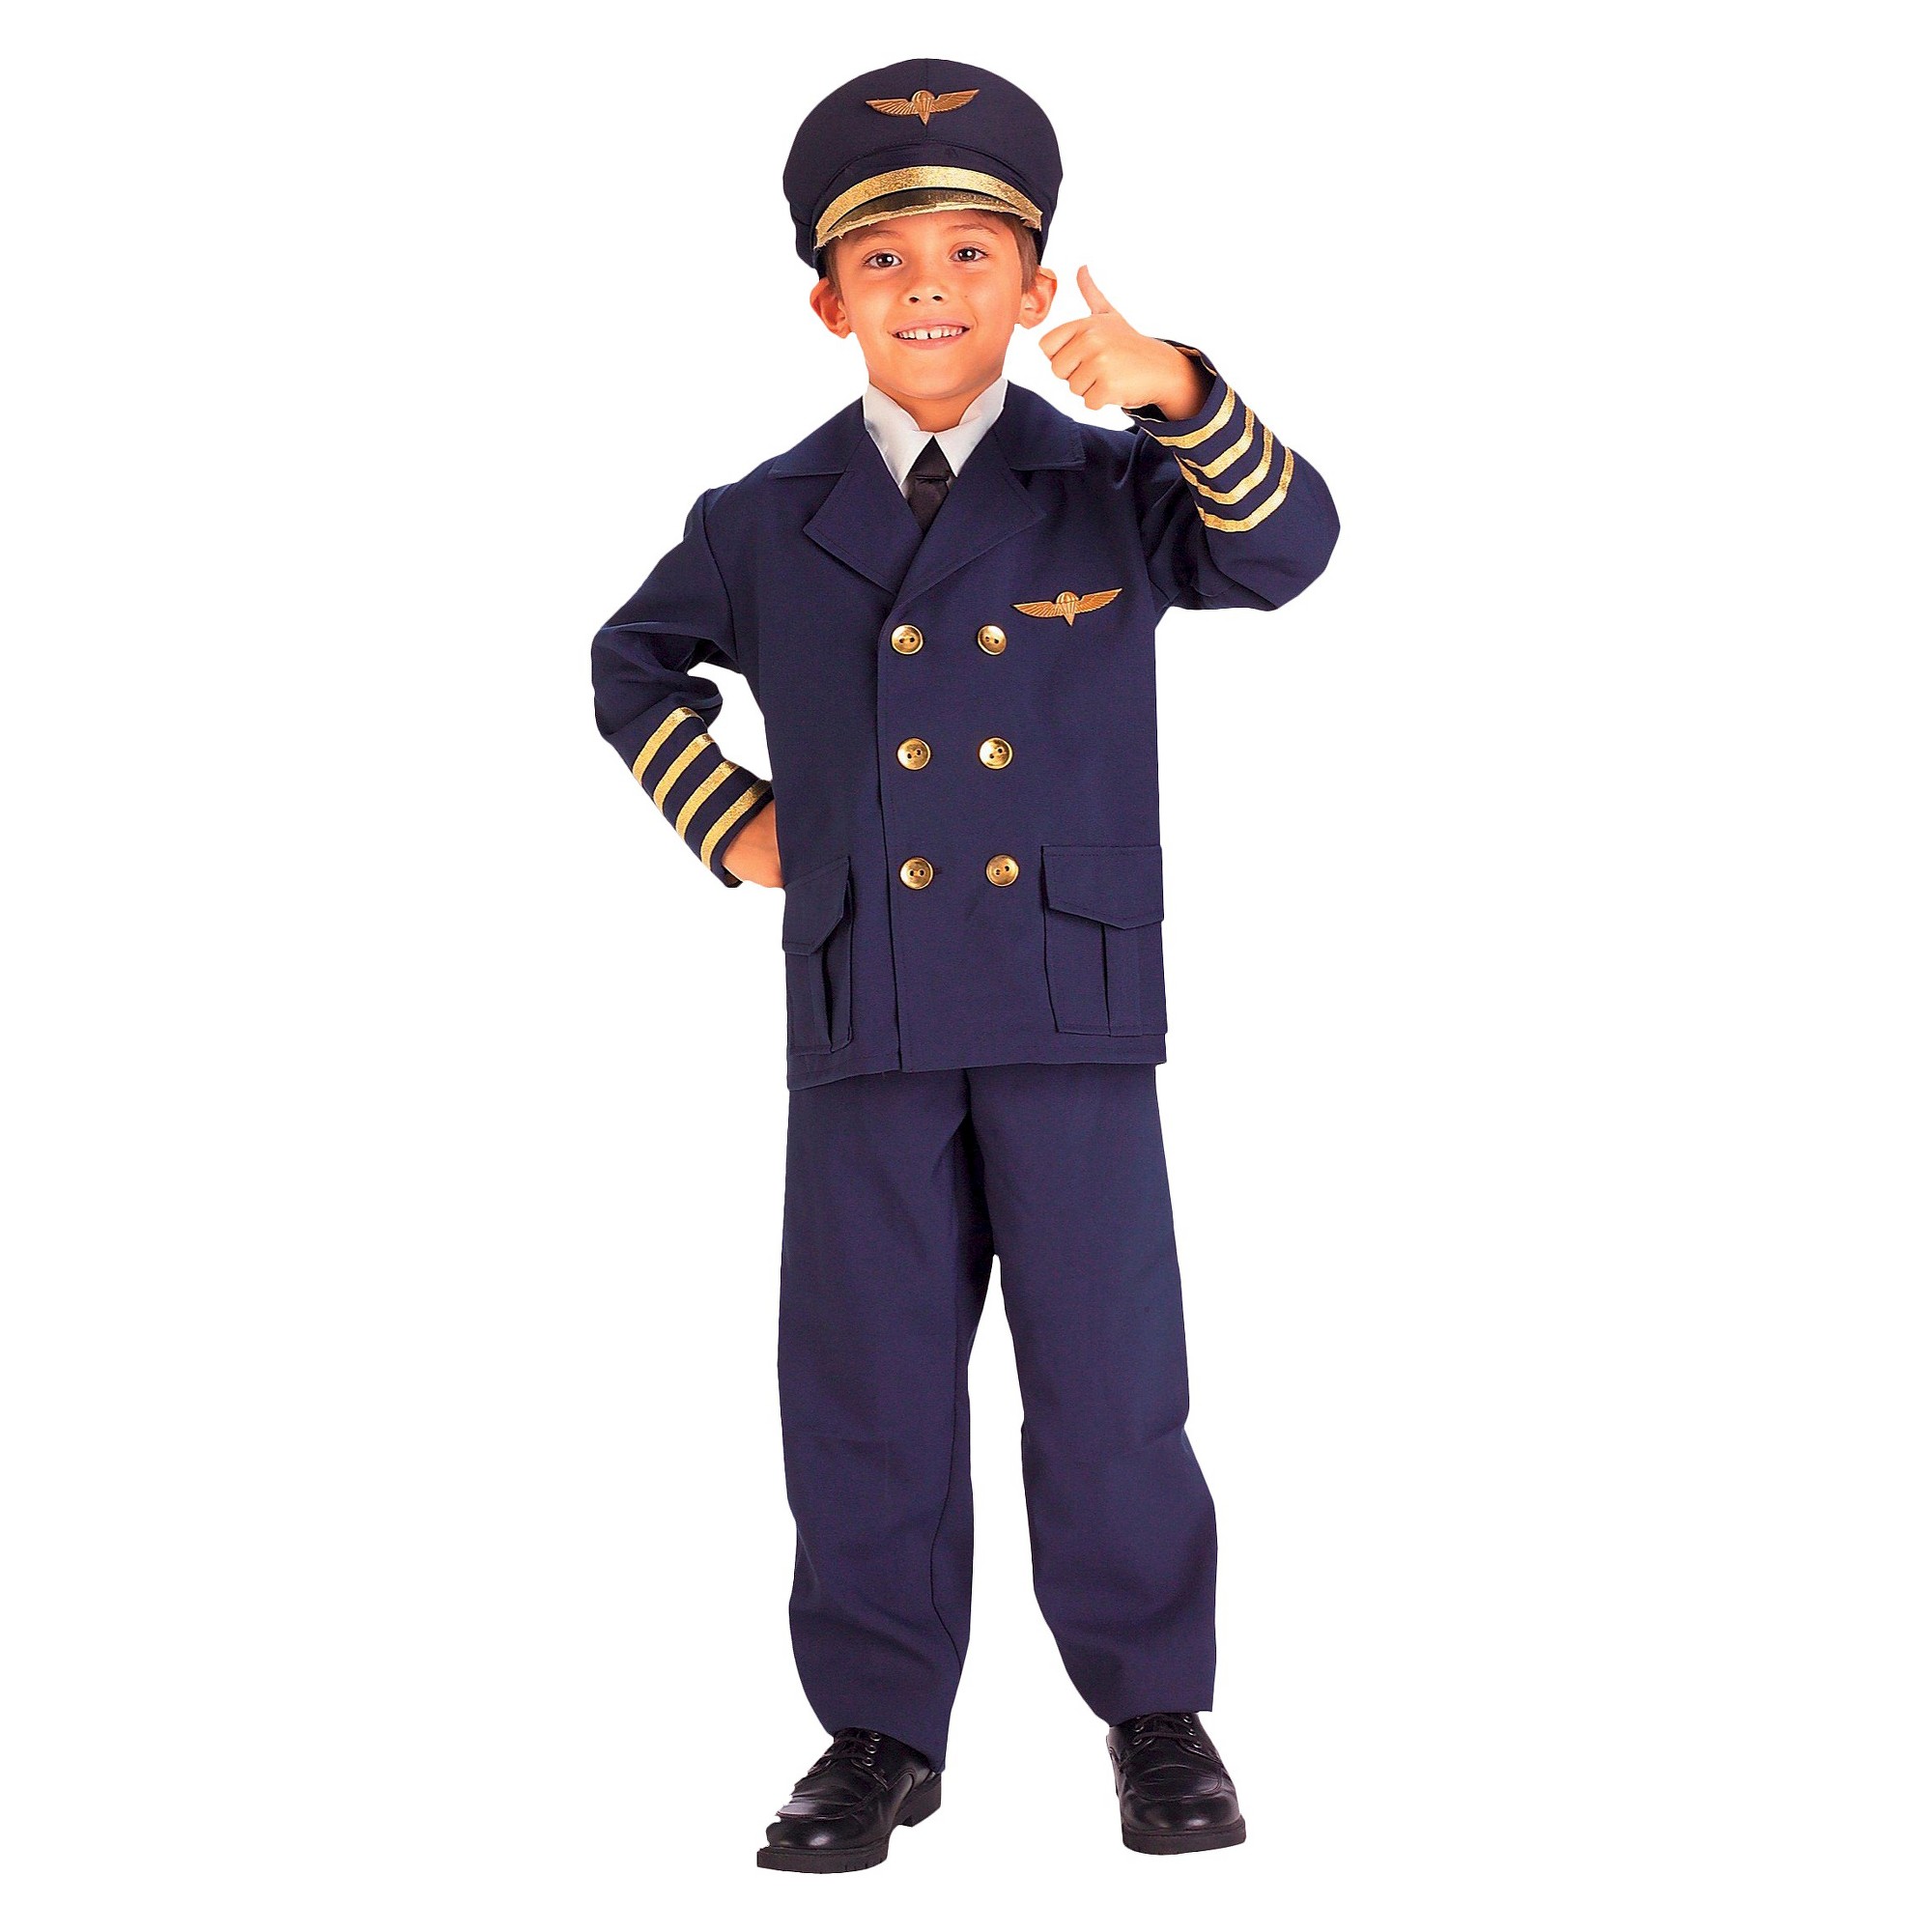 Halloween Boys Airline Pilot Costume - S(4-6), Boy's, Size: Small(4-6), Blue